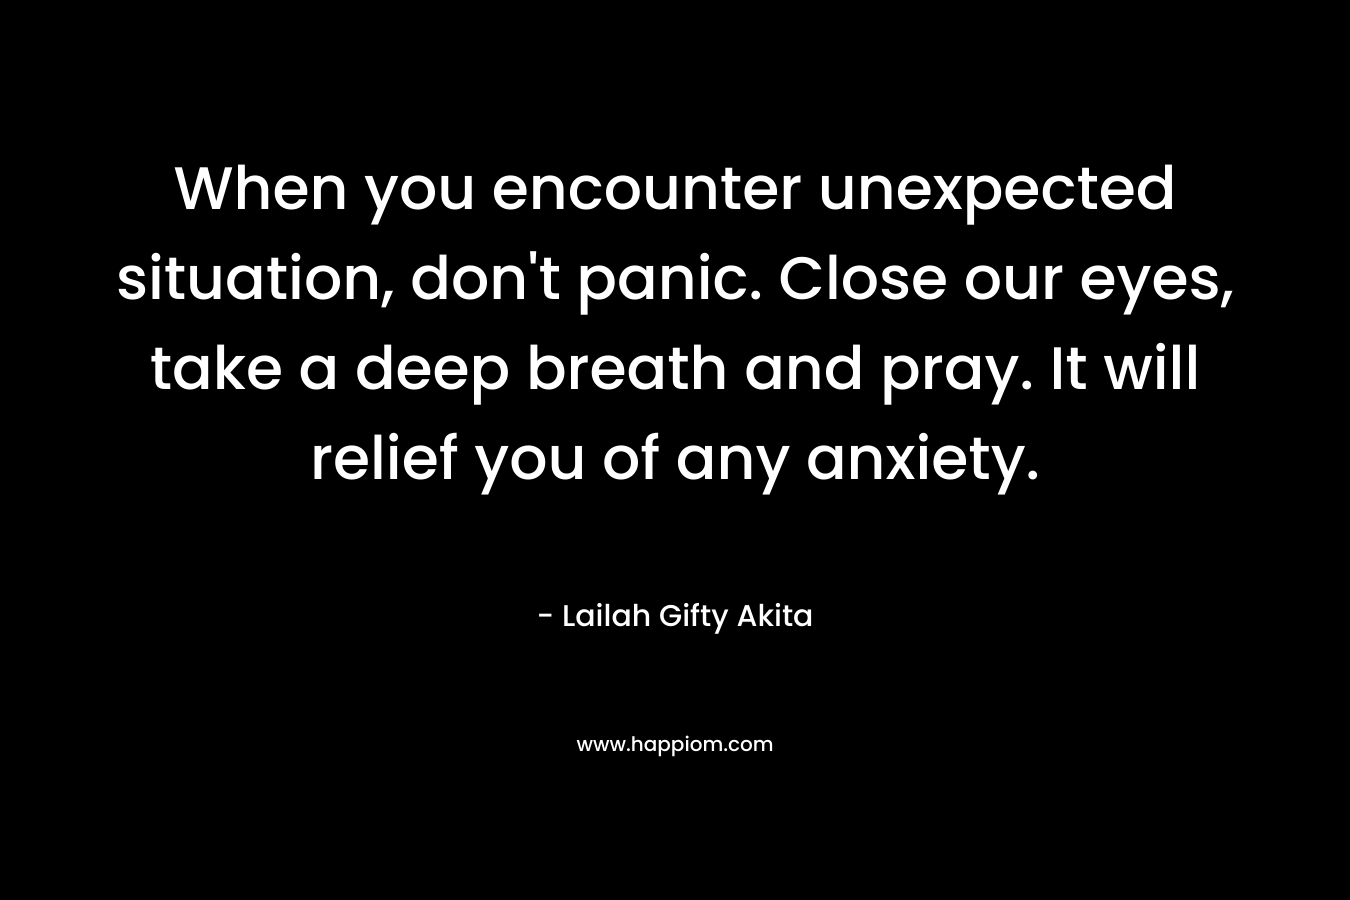 When you encounter unexpected situation, don't panic. Close our eyes, take a deep breath and pray. It will relief you of any anxiety.